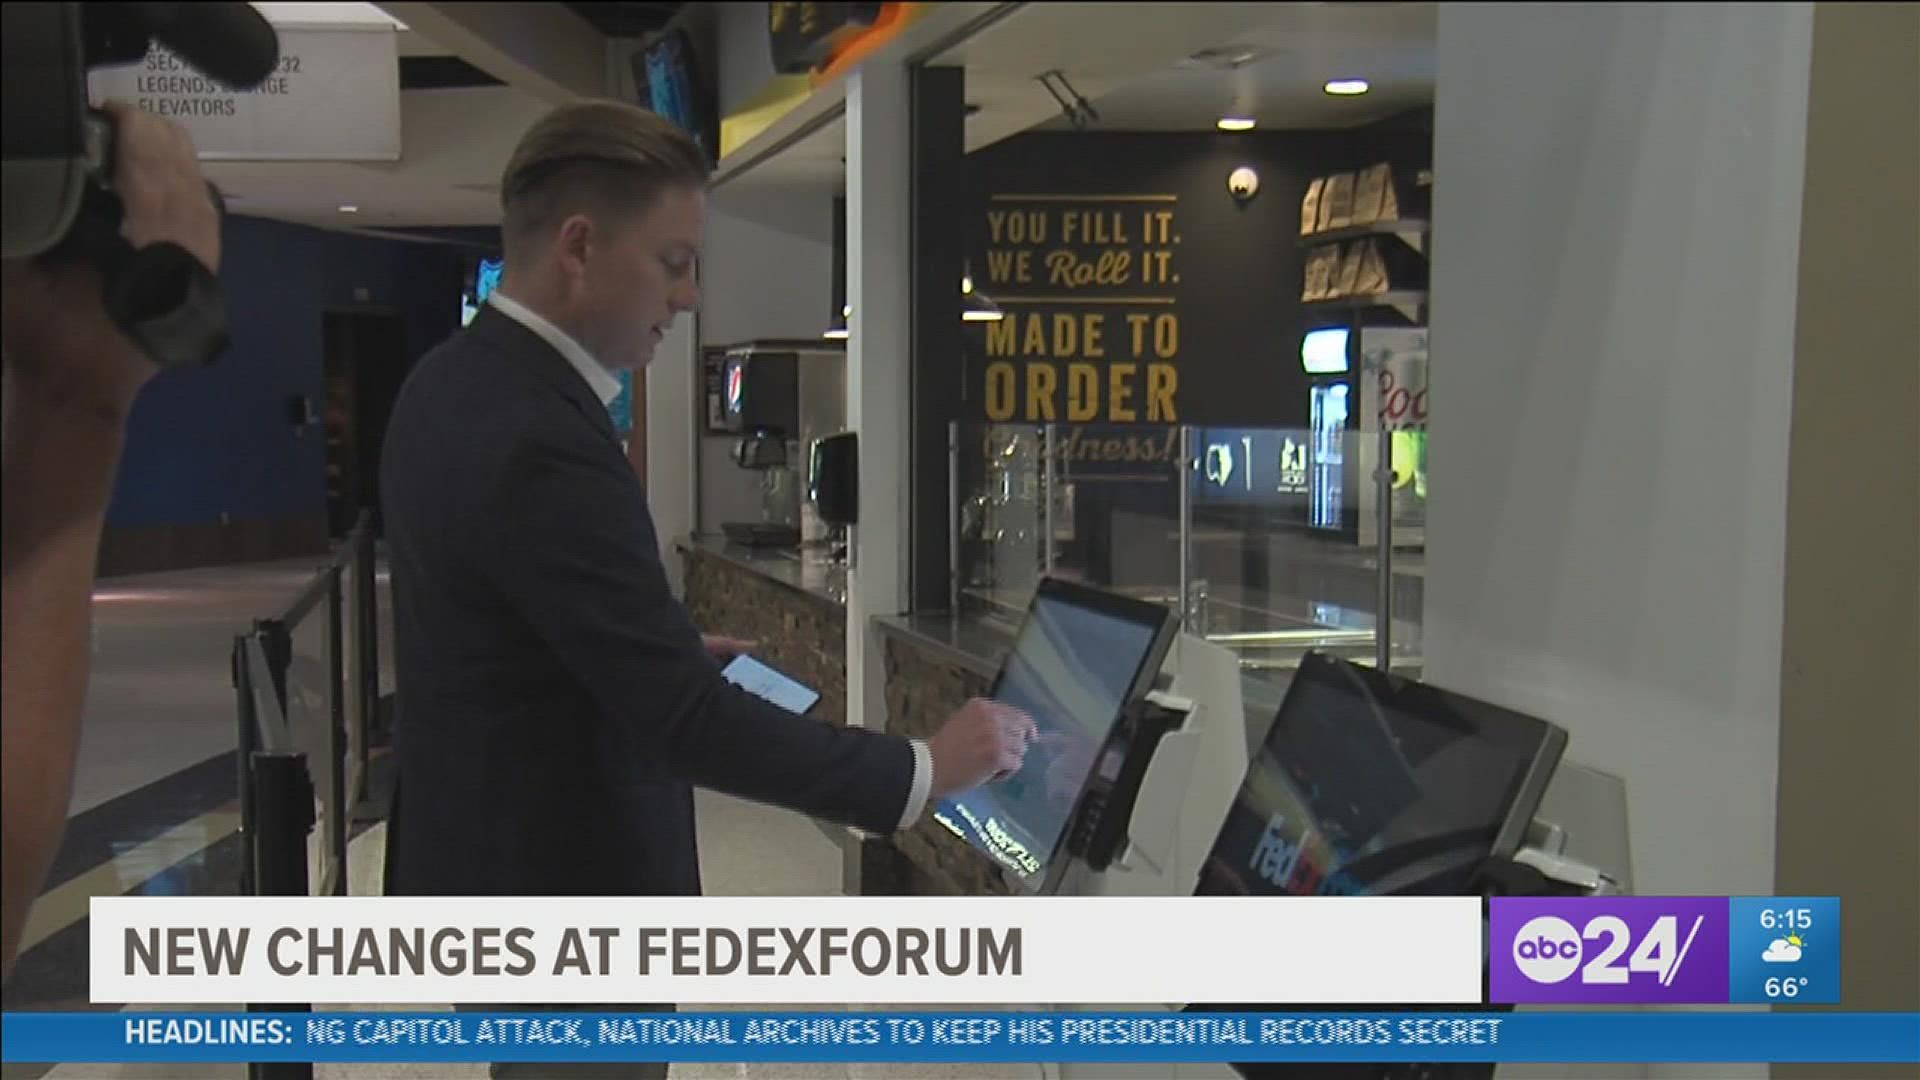 ABC24 got an inside look at changes the Forum made to its plaza